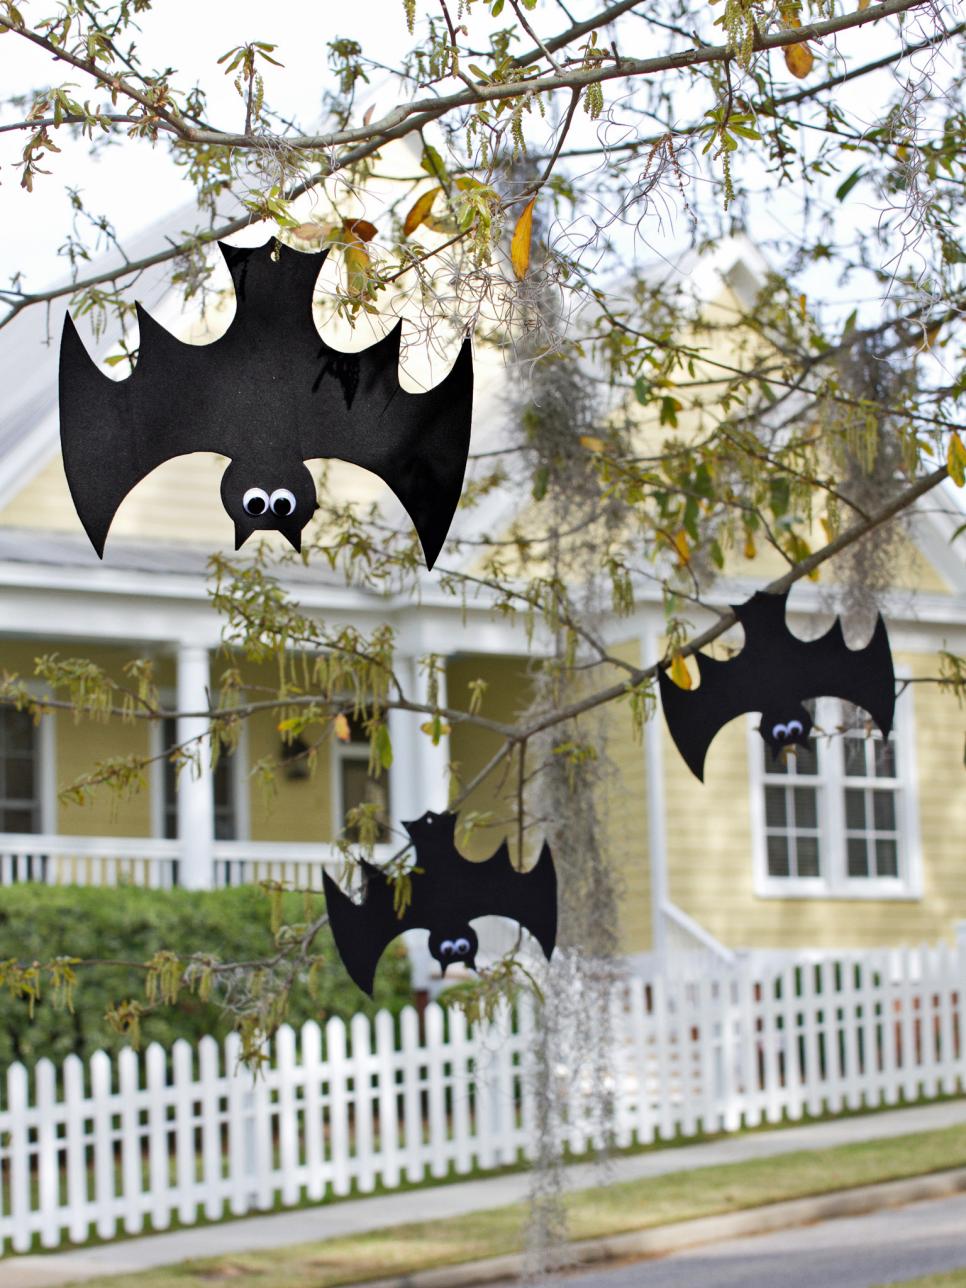 15 DECORATING-IDEAS FOR HALLOWEEN